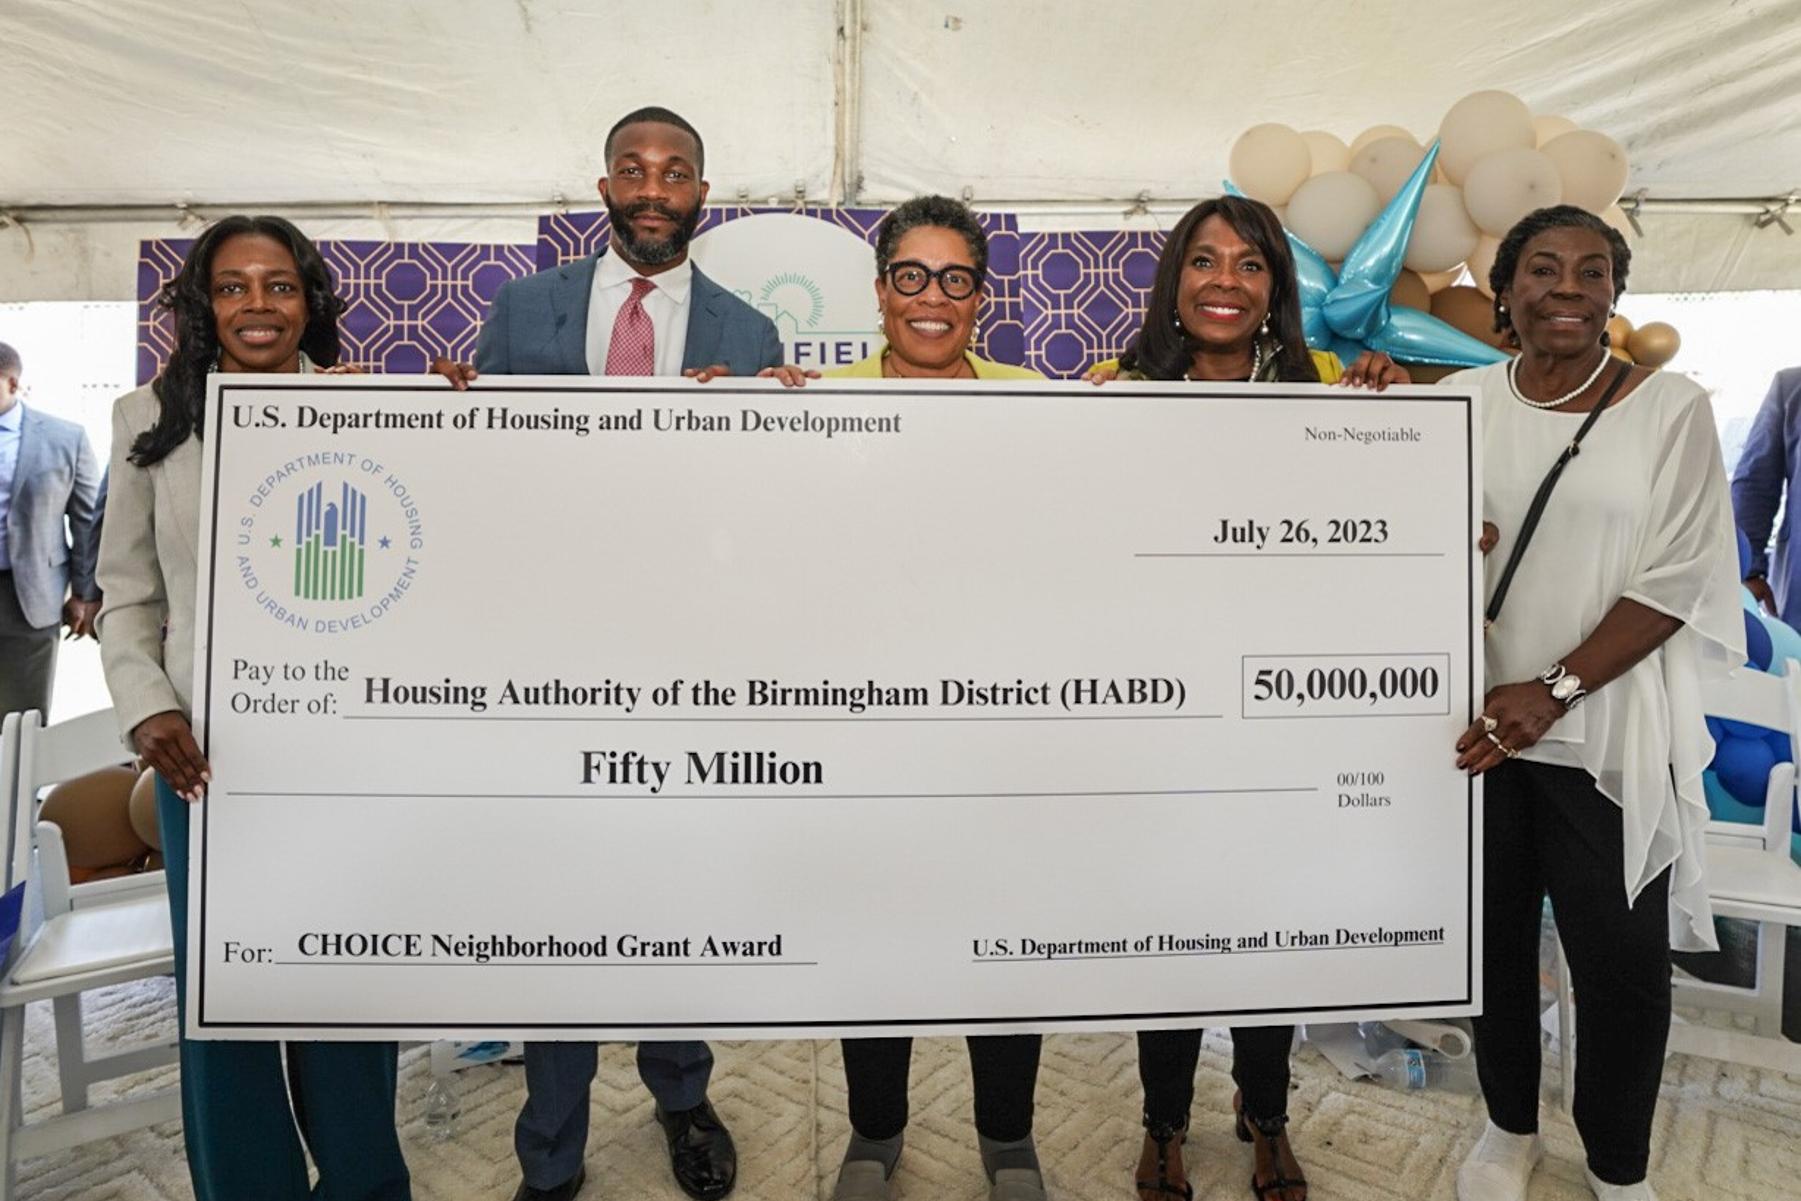 Read More - Rep. Sewell Joins HUD Secretary Fudge, Mayor Woodfin, and Community Leaders to Announce $50 Million Choice Neighborhoods Grant